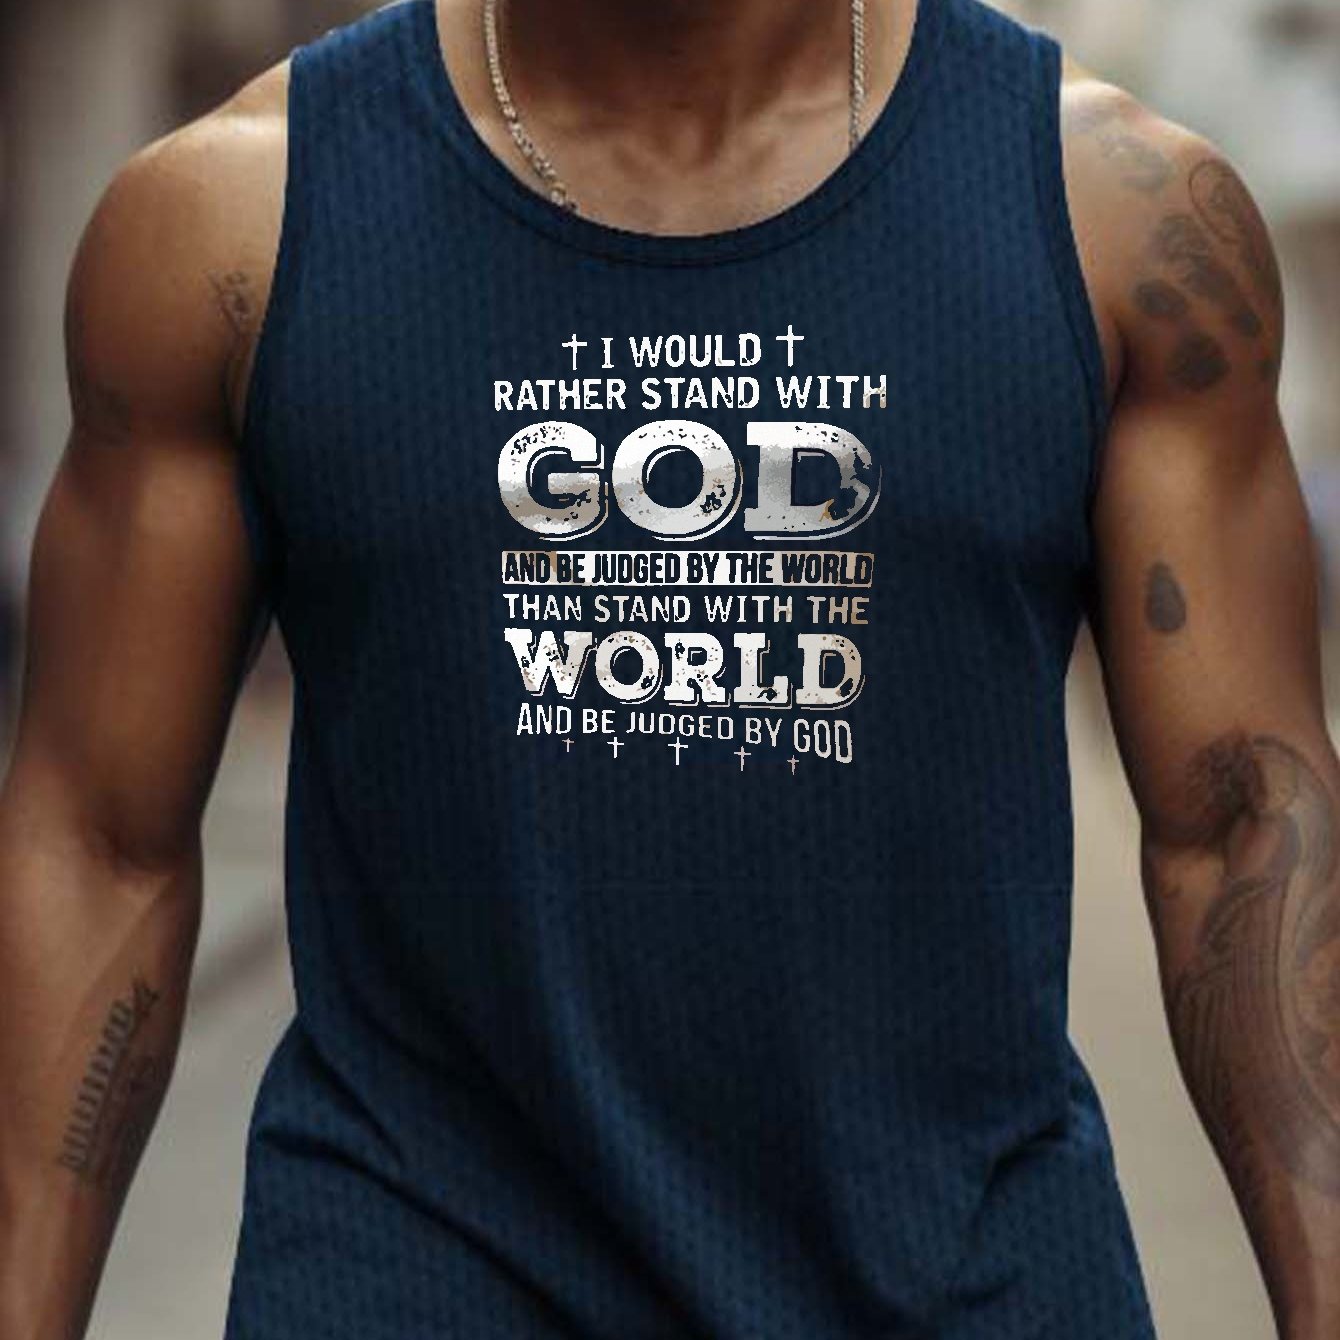 I Would Rather Stand With GOD t Men's Christian Tank Top claimedbygoddesigns